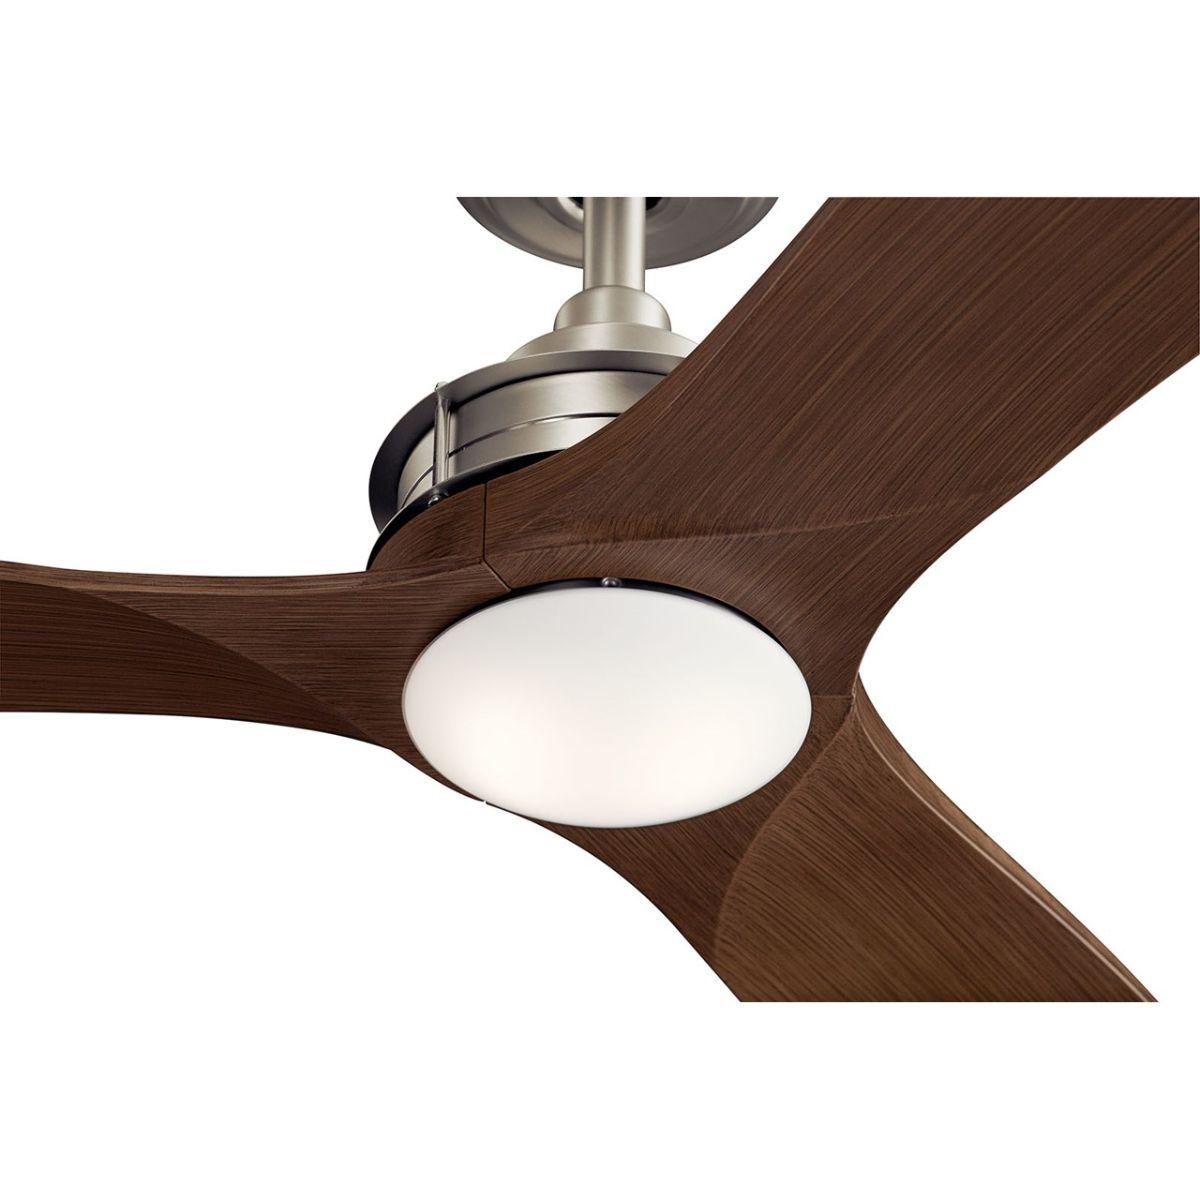 Ried 56 Inch Propeller Outdoor Ceiling Fan With Wall Control - Bees Lighting